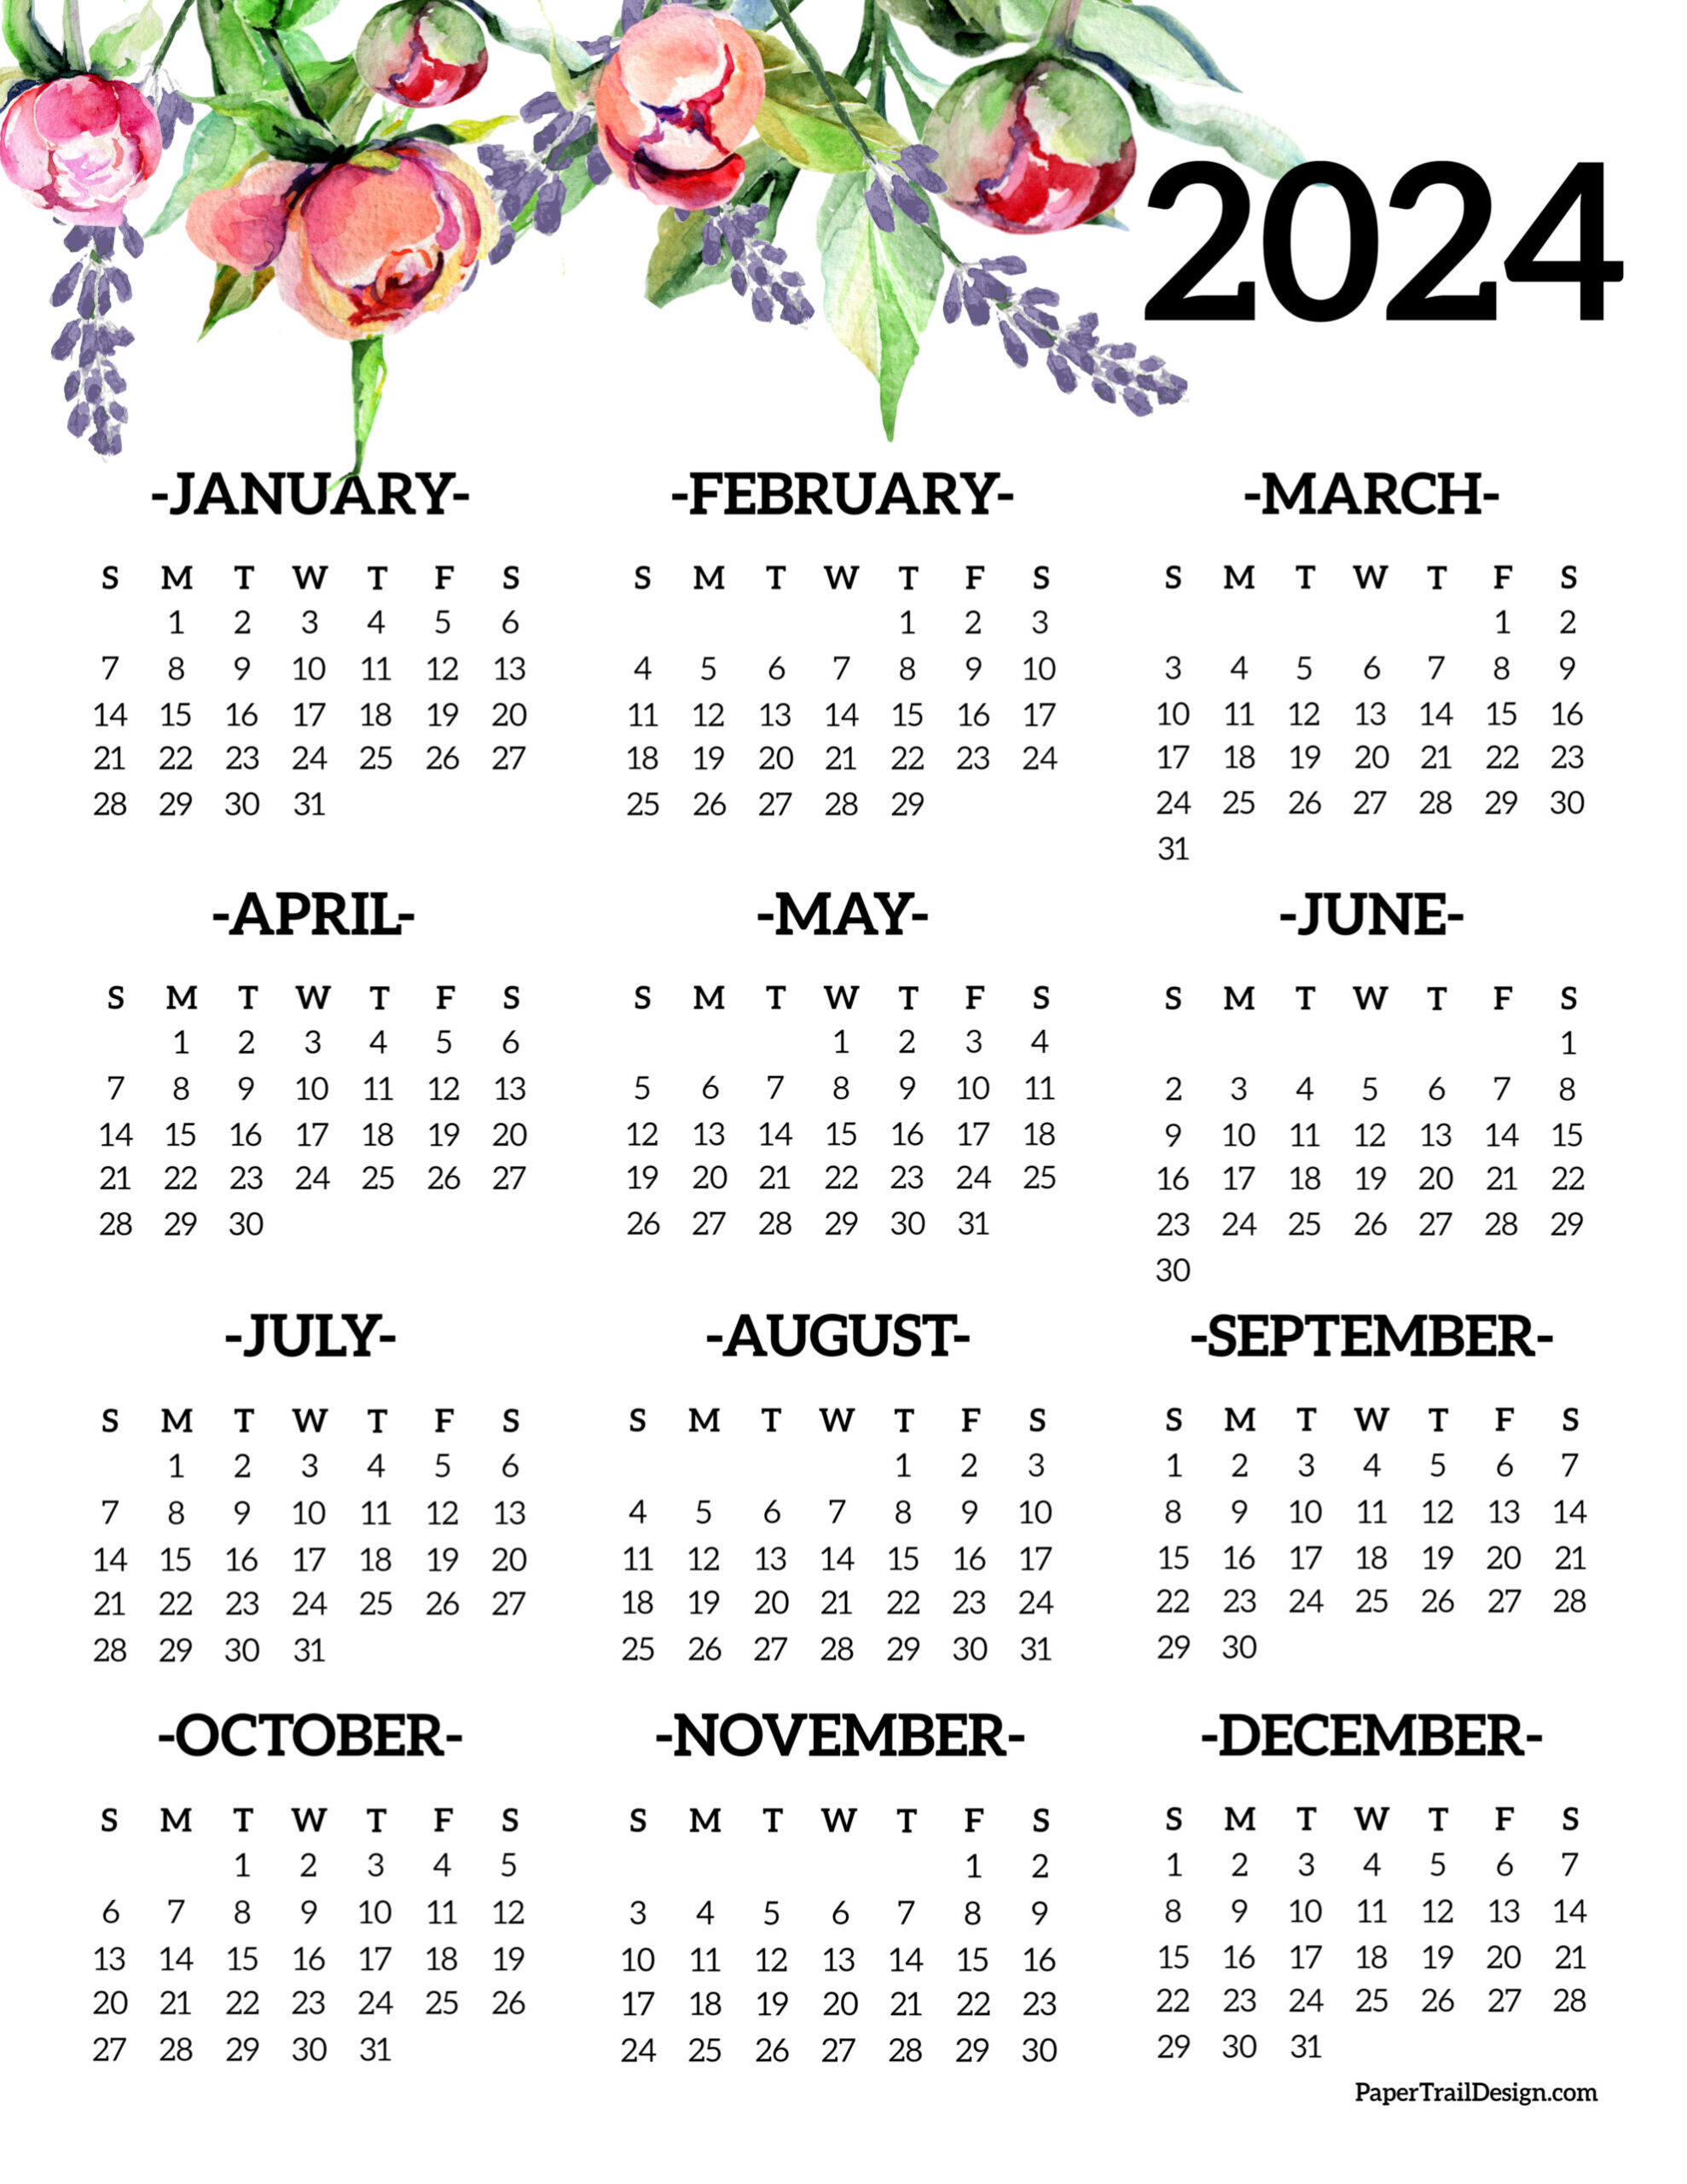 Calendar 2024 Printable One Page - Paper Trail Design for 2024 Yearly Calendar Printable One Page Free